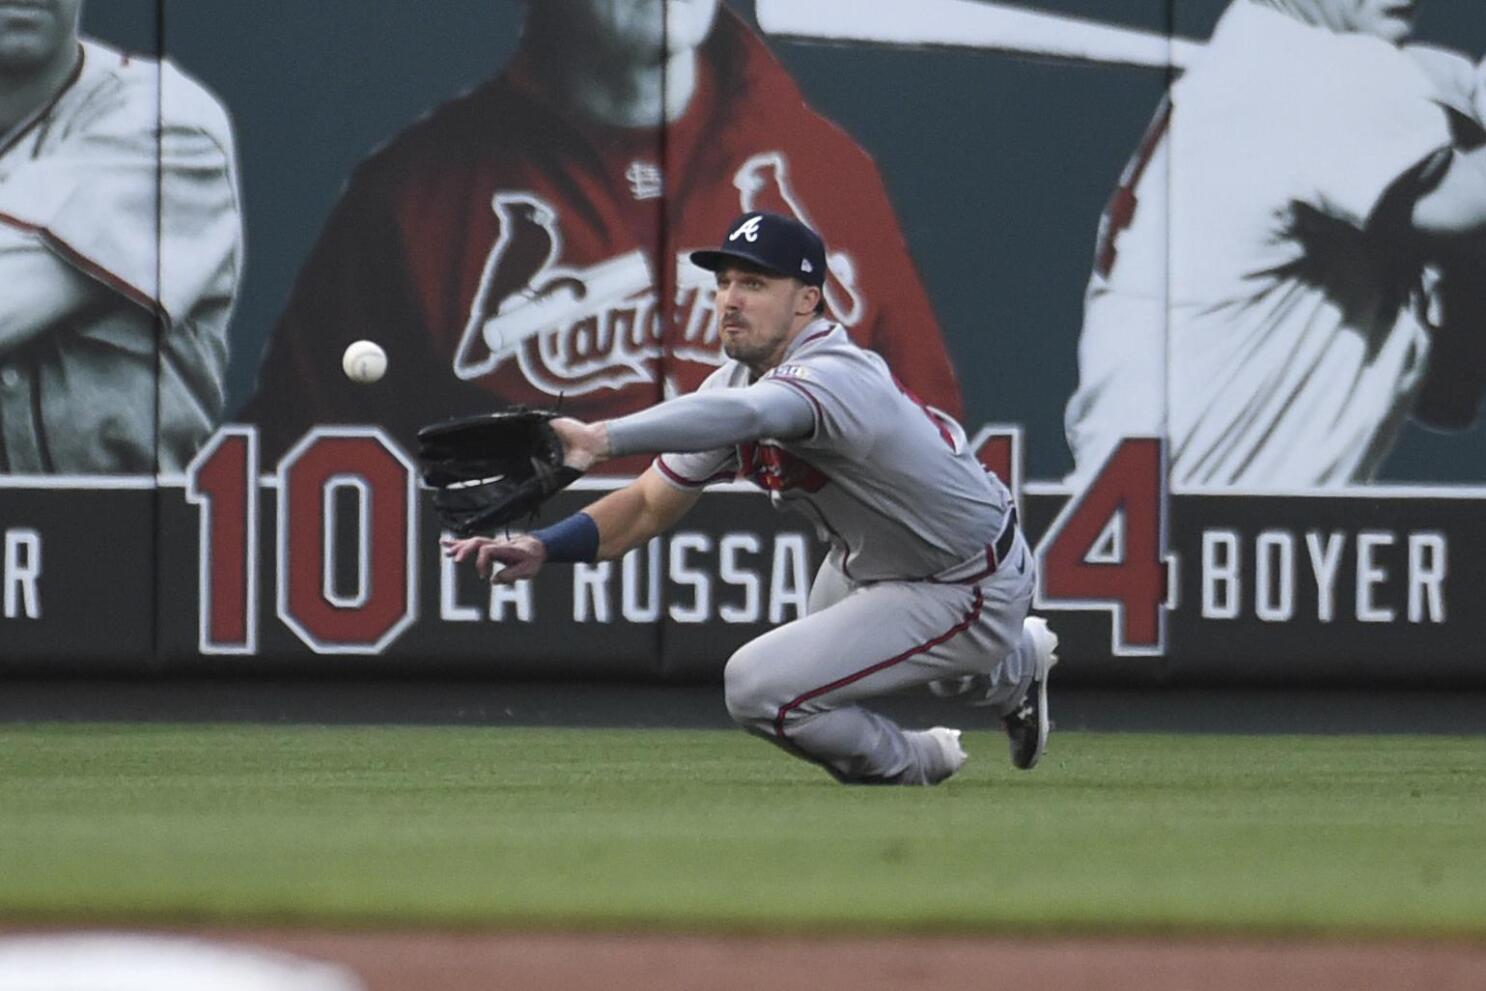 Duvall, Soler home runs power Braves past Cardinals - The Dispatch